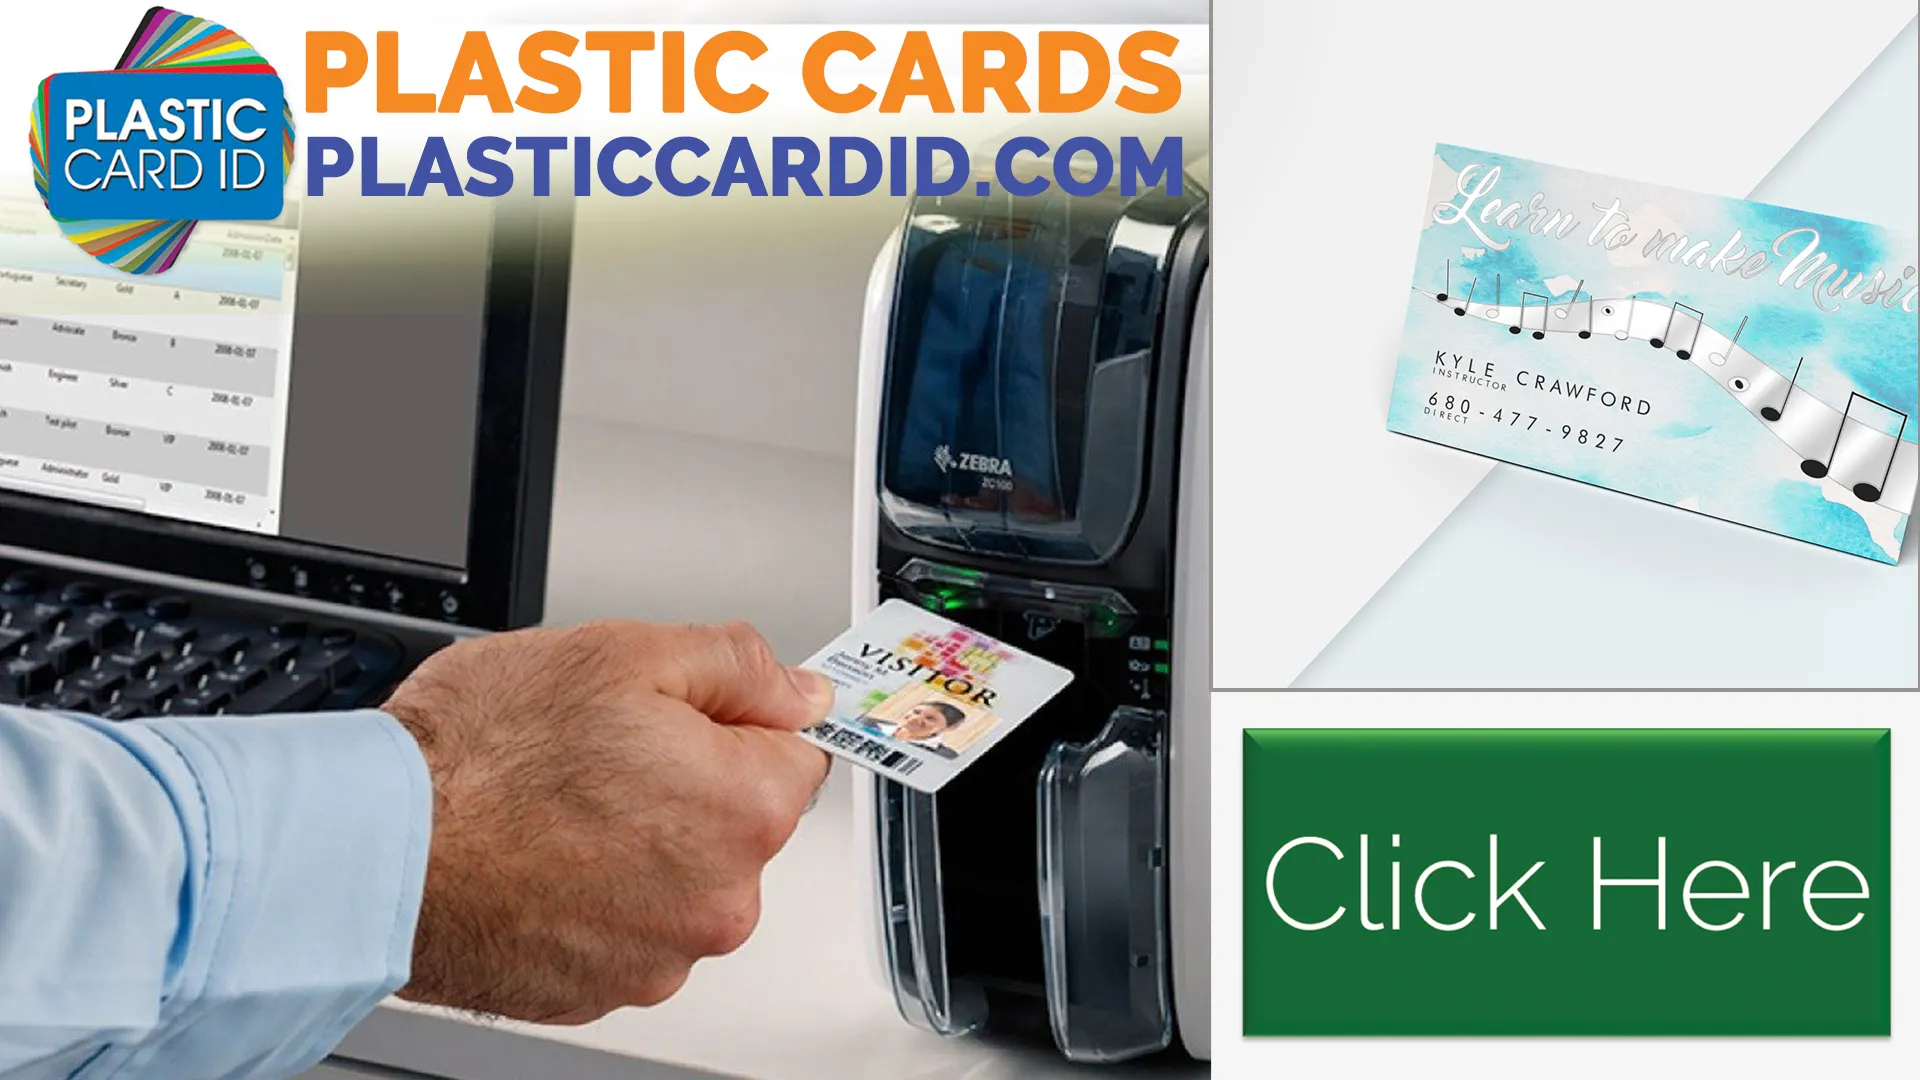 State-of-the-Art Card Printers: Print Like a Pro